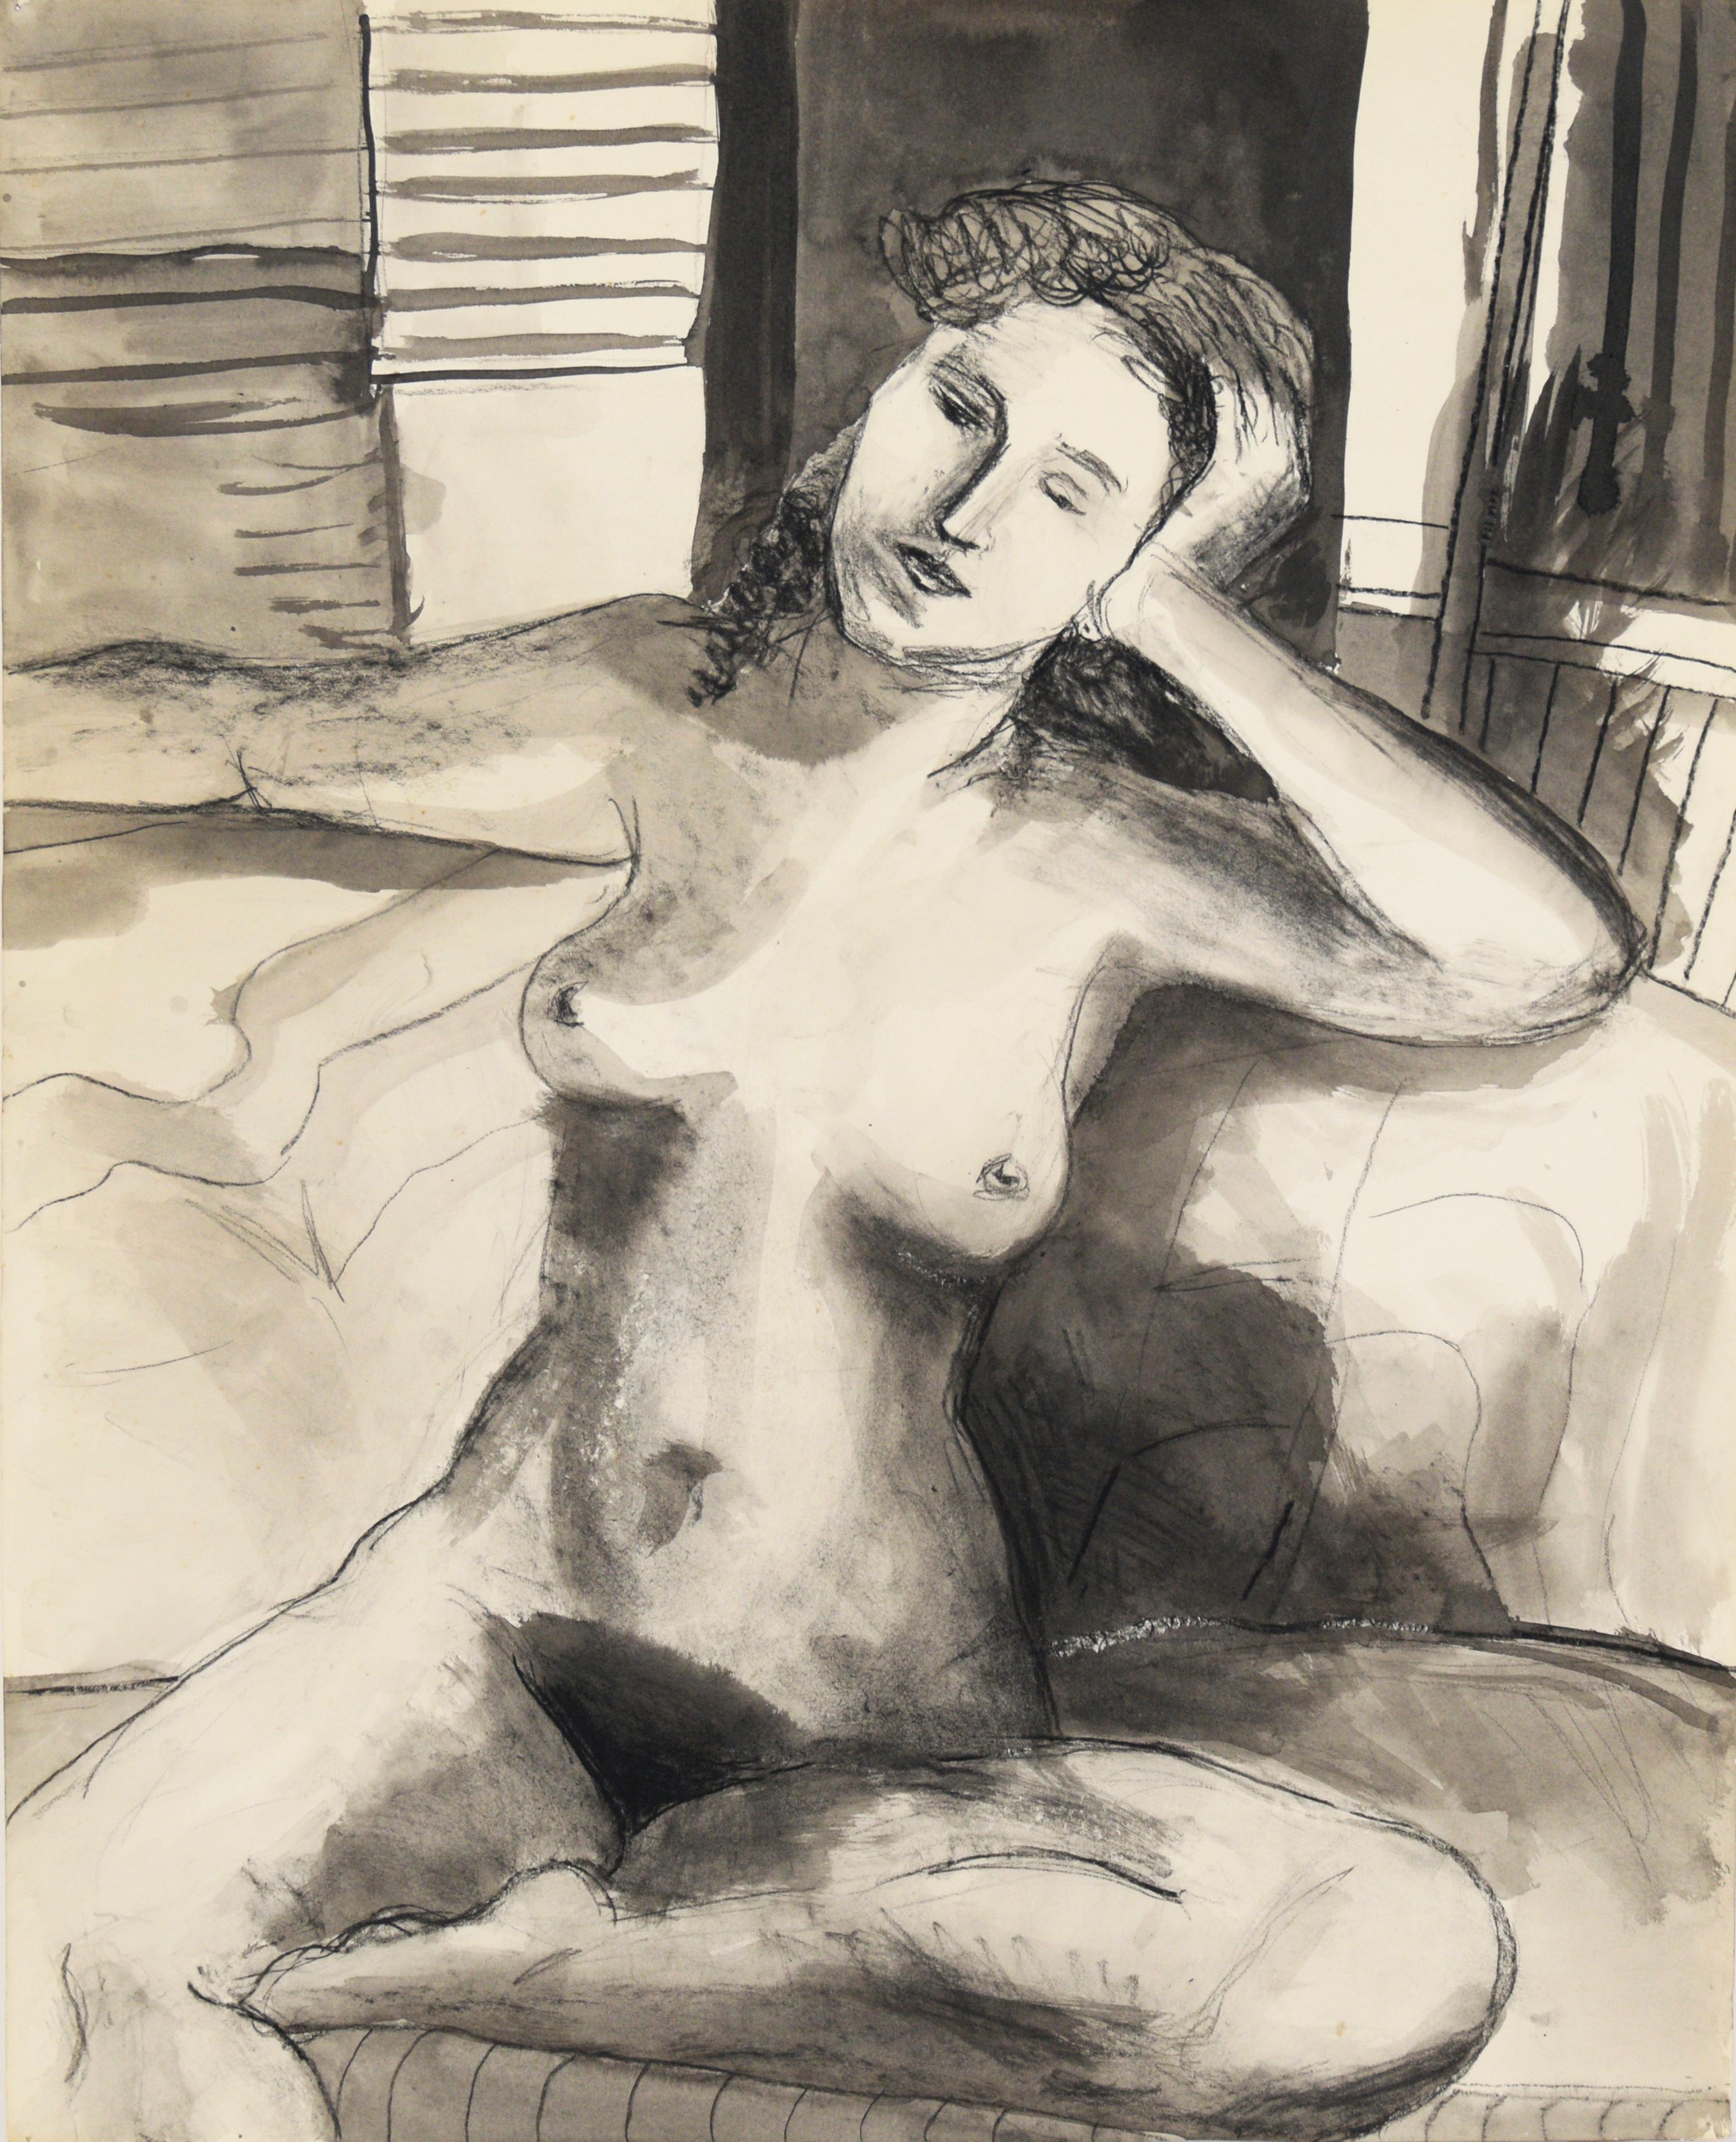 Katherine Kallick Figurative Painting - Figurative Nude Study - Watercolor and Charcoal on Paper